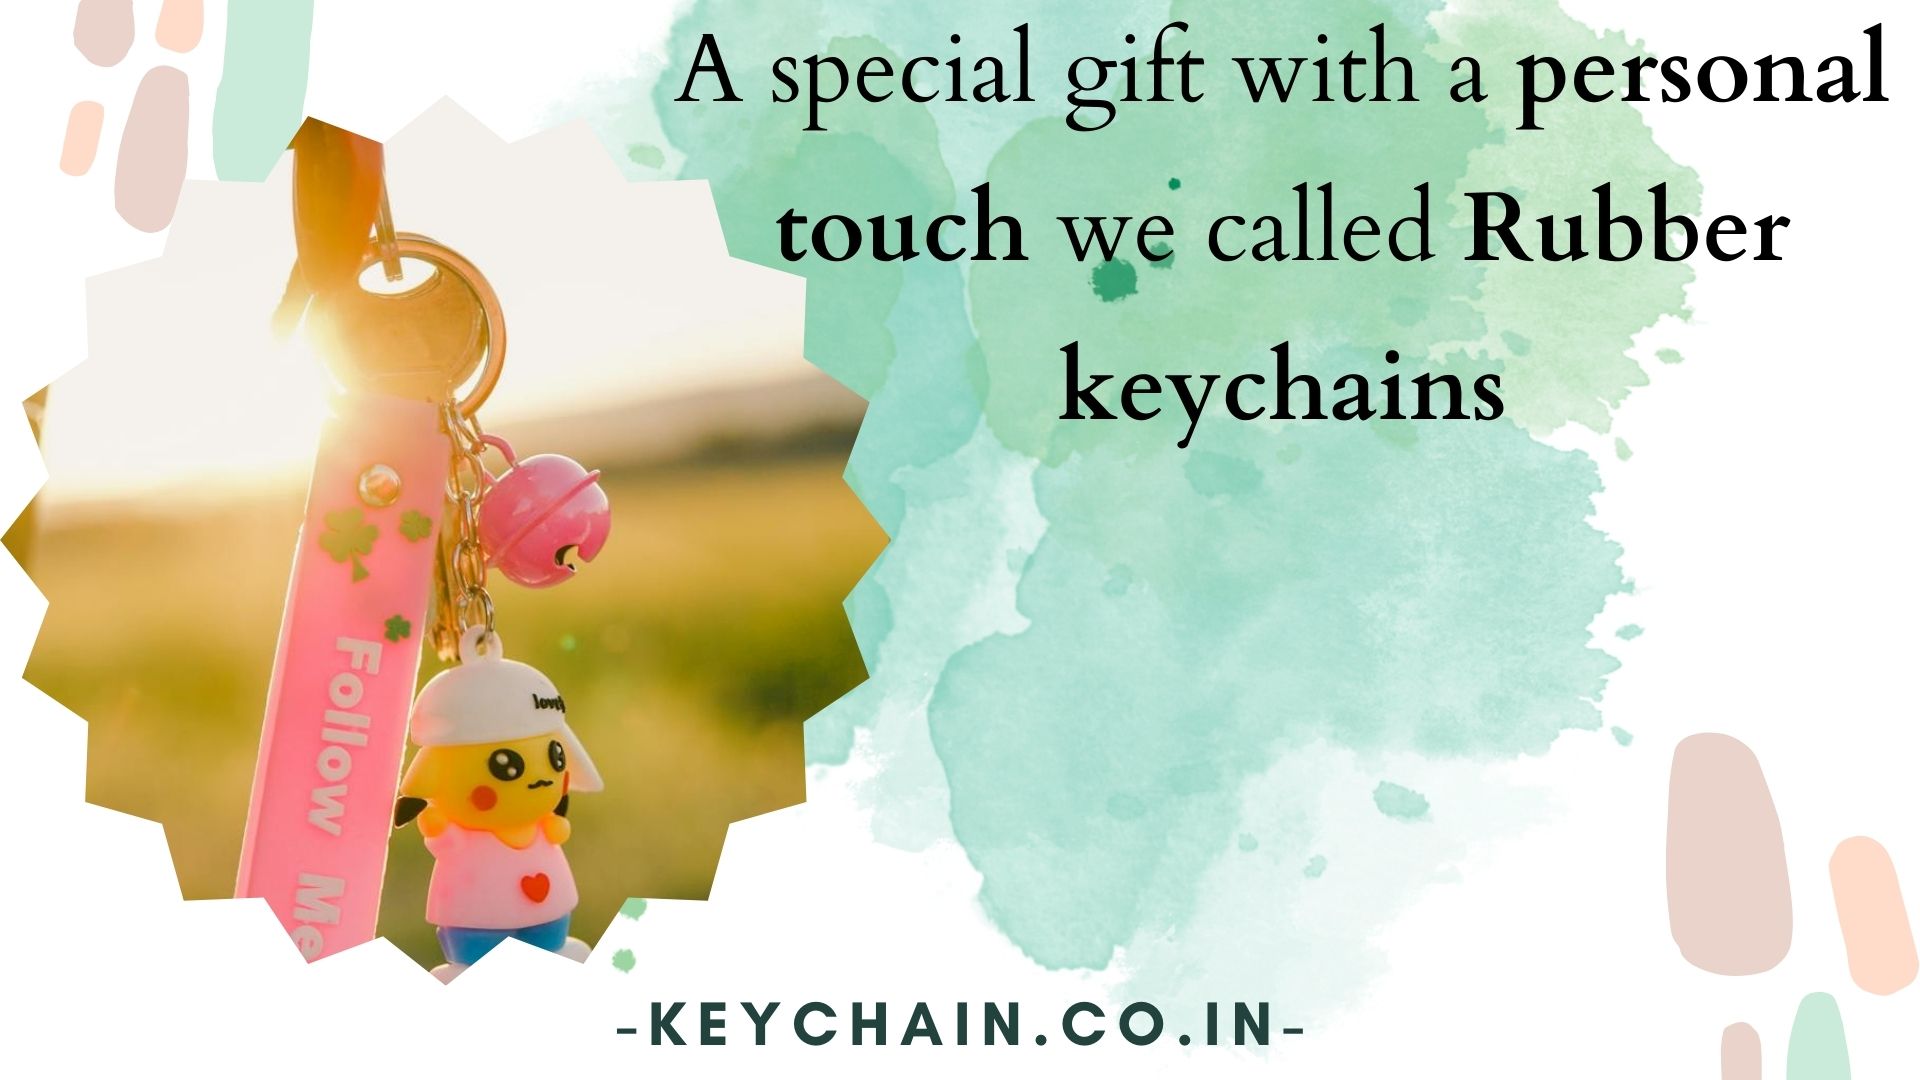 A special gift with a personal touch we called Rubber keychains